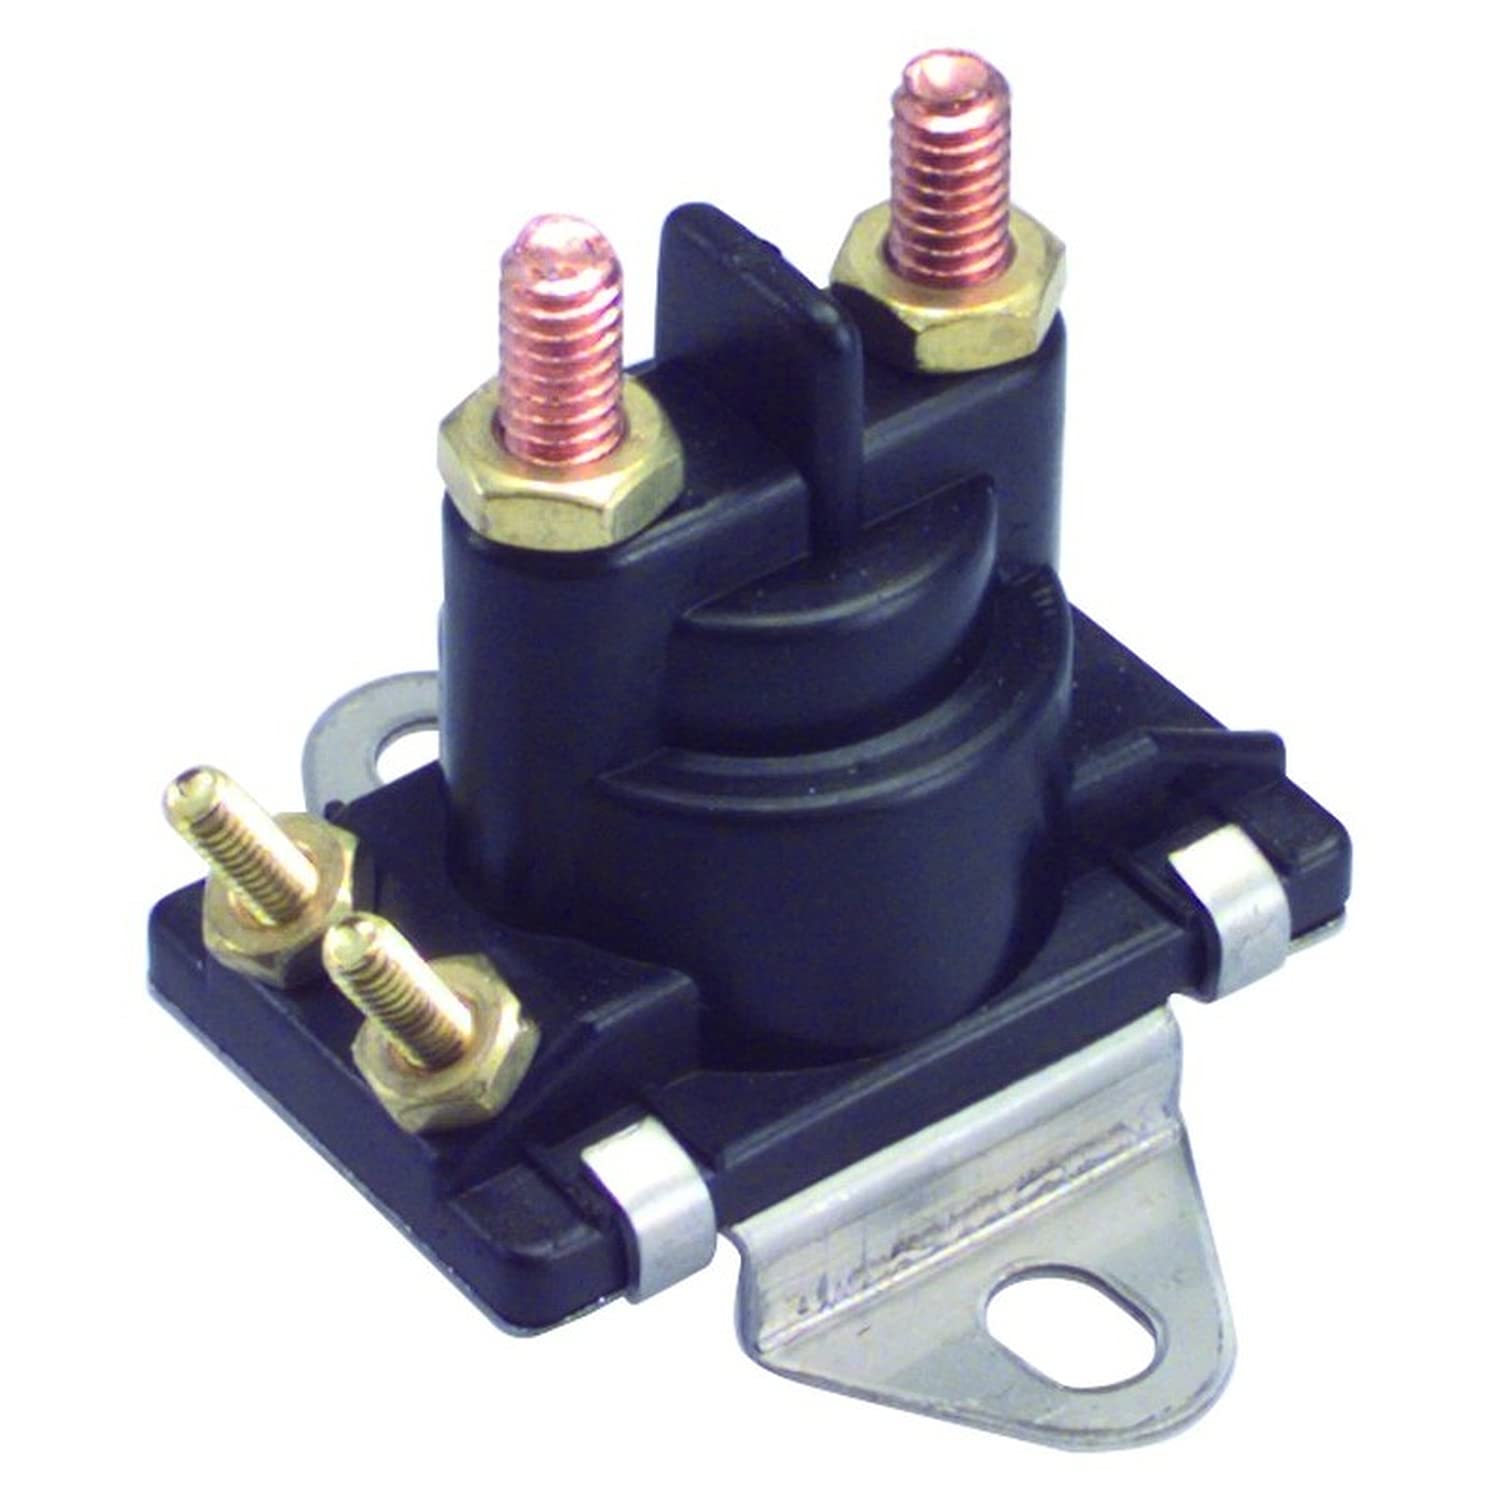 New Marine Starter Solenoid Tilt Trim Relay Compatible with MerCruiser 89-96158T Compatible with Mercury & Mariner Outboards 35-275 HP 89-846070 89-94318